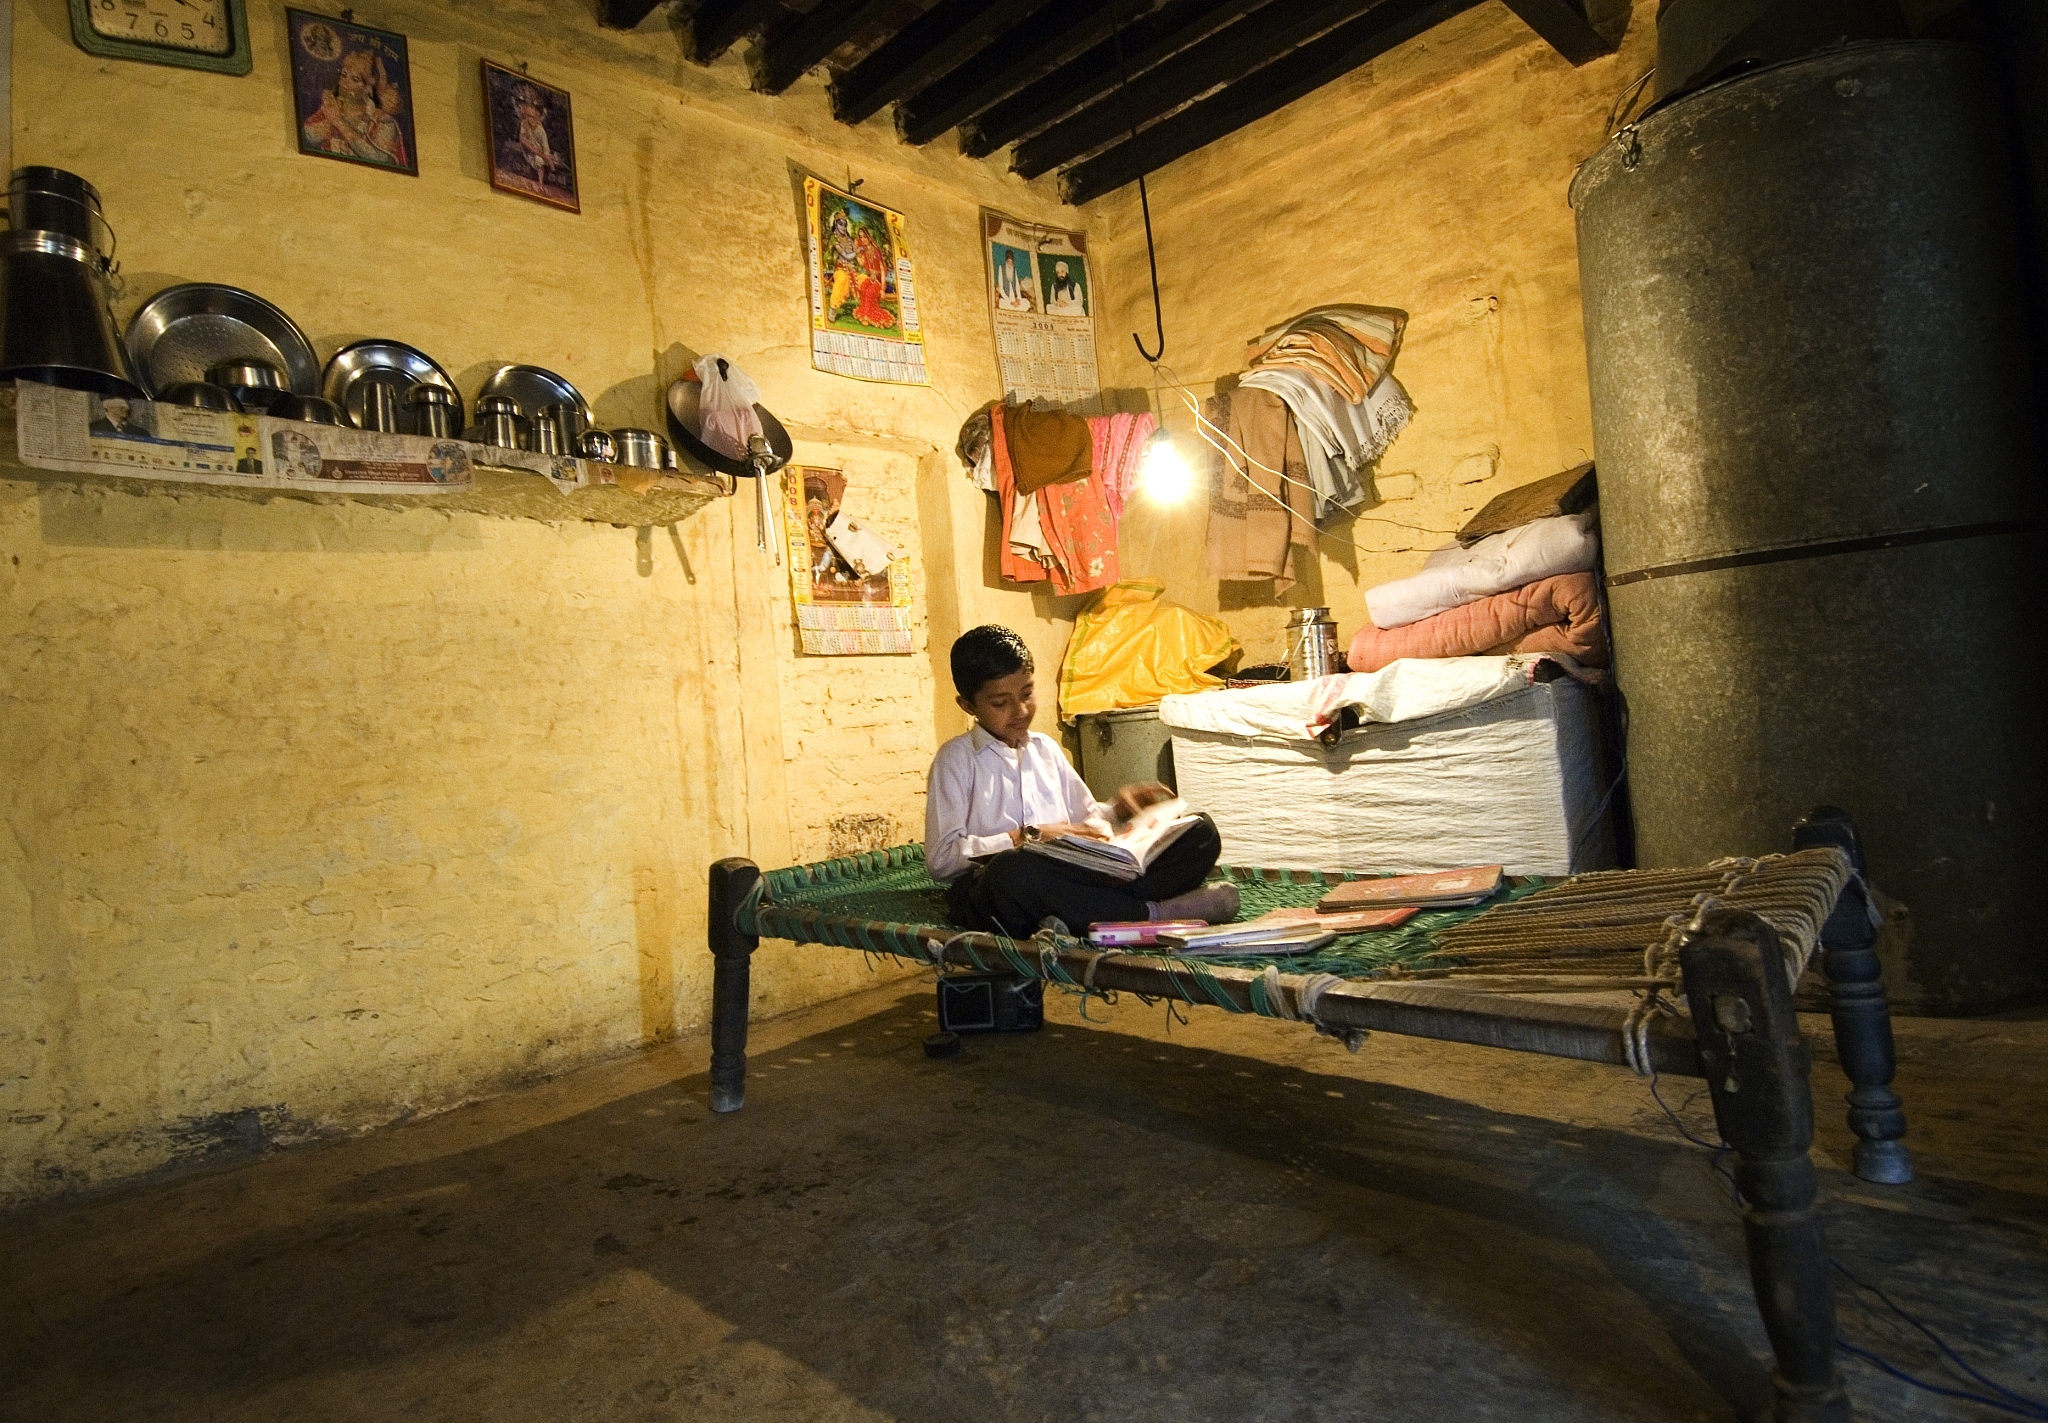 A house in rural India gets electricity for the first time. (Priyanka Parashar/Mint via Getty Images)